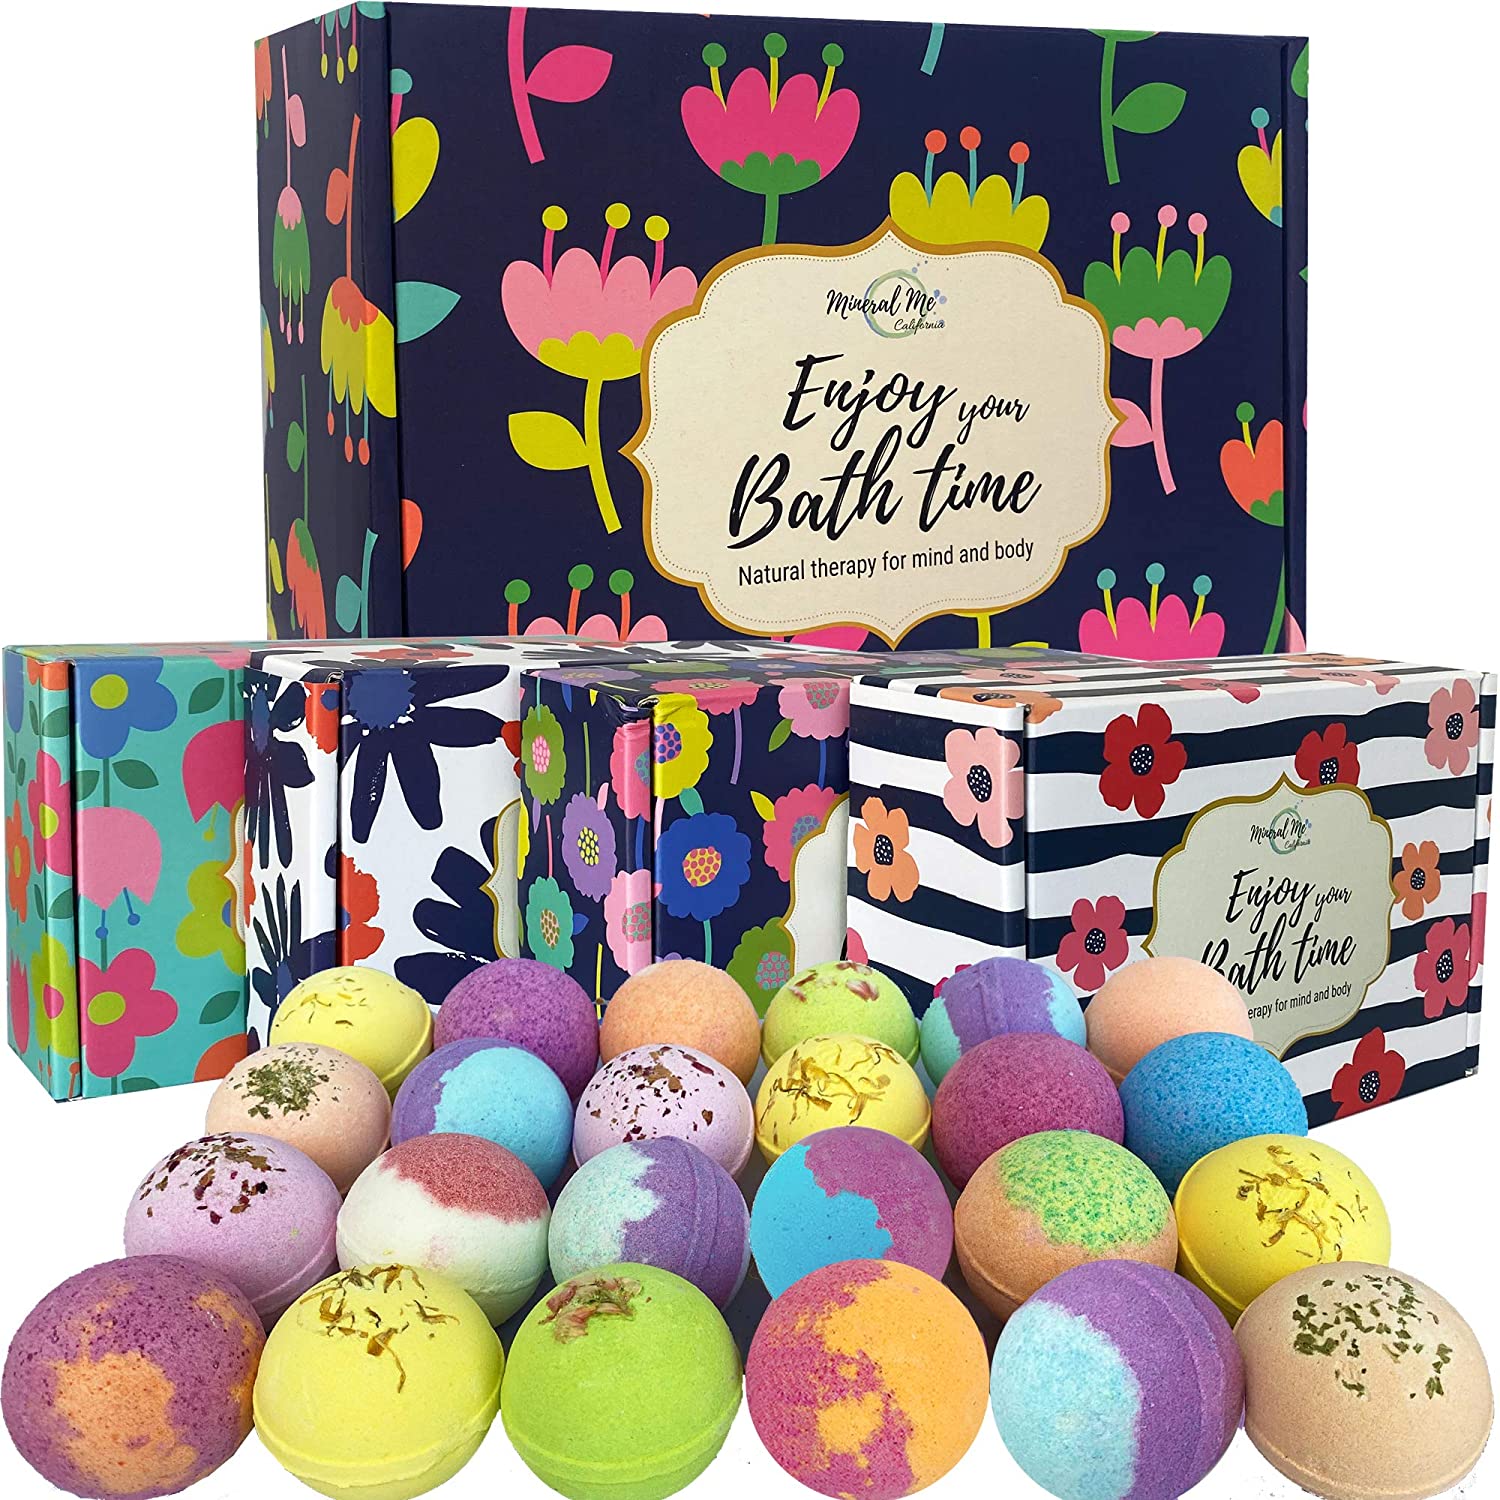 Bath Bombs Gift Set- 24 Aromatherapy BathBombs Made w/ Organic Essential Oils- Spa Fizzies w/Moisturizing Shea Butter and Bath Salts for Relaxation and Stress Relief- Gift for Women and Kids